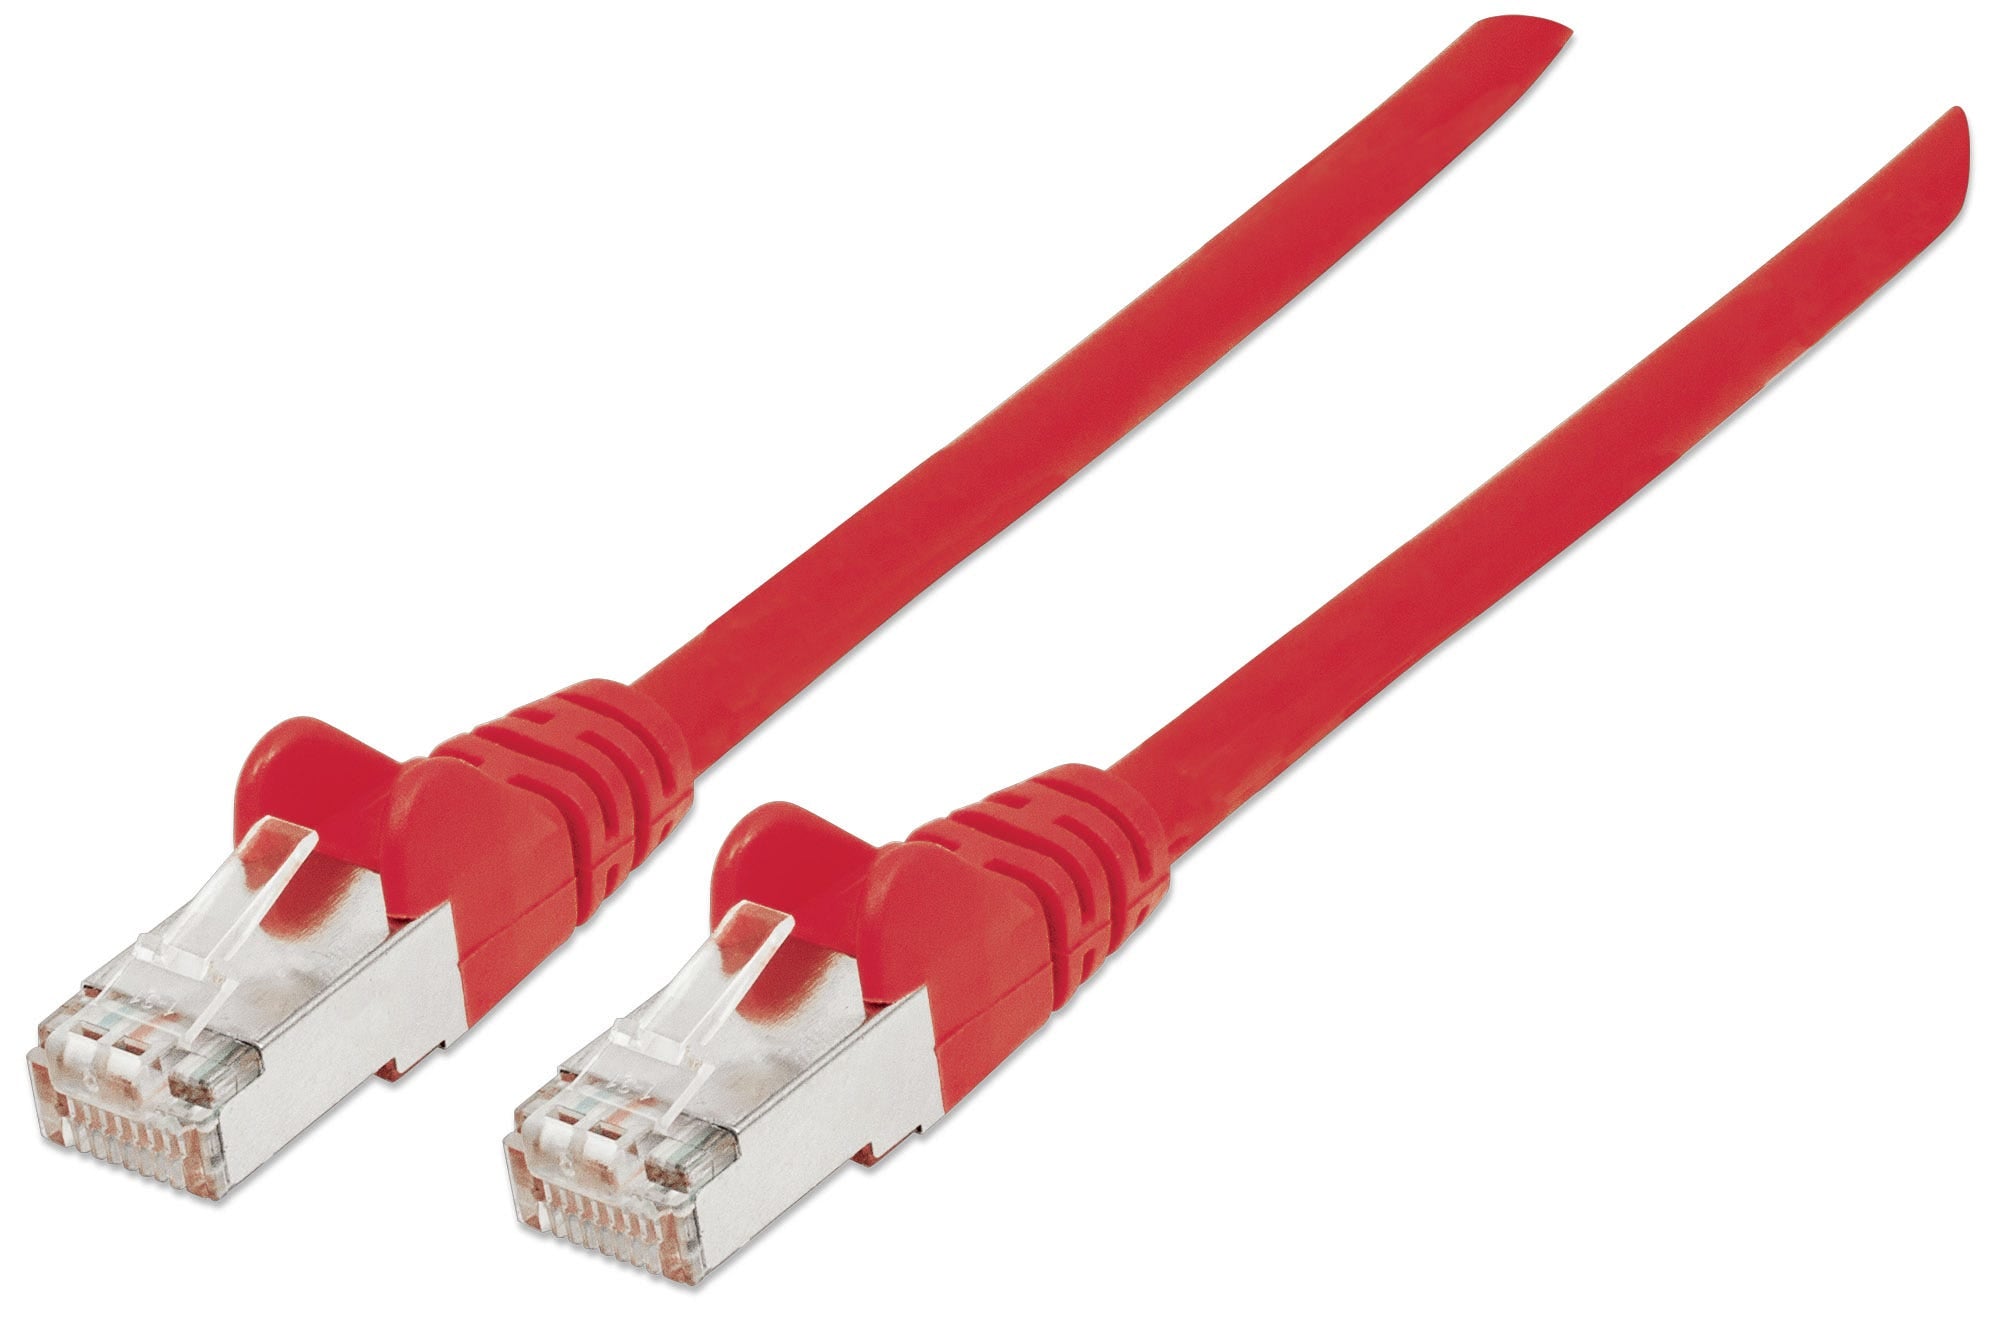 Intellinet Network Patch Cable, Cat6, 5m, Red, Copper, S/FTP, LSOH / LSZH, PVC, RJ45, Gold Plated Contacts, Snagless, Booted, Lifetime Warranty, Polybag